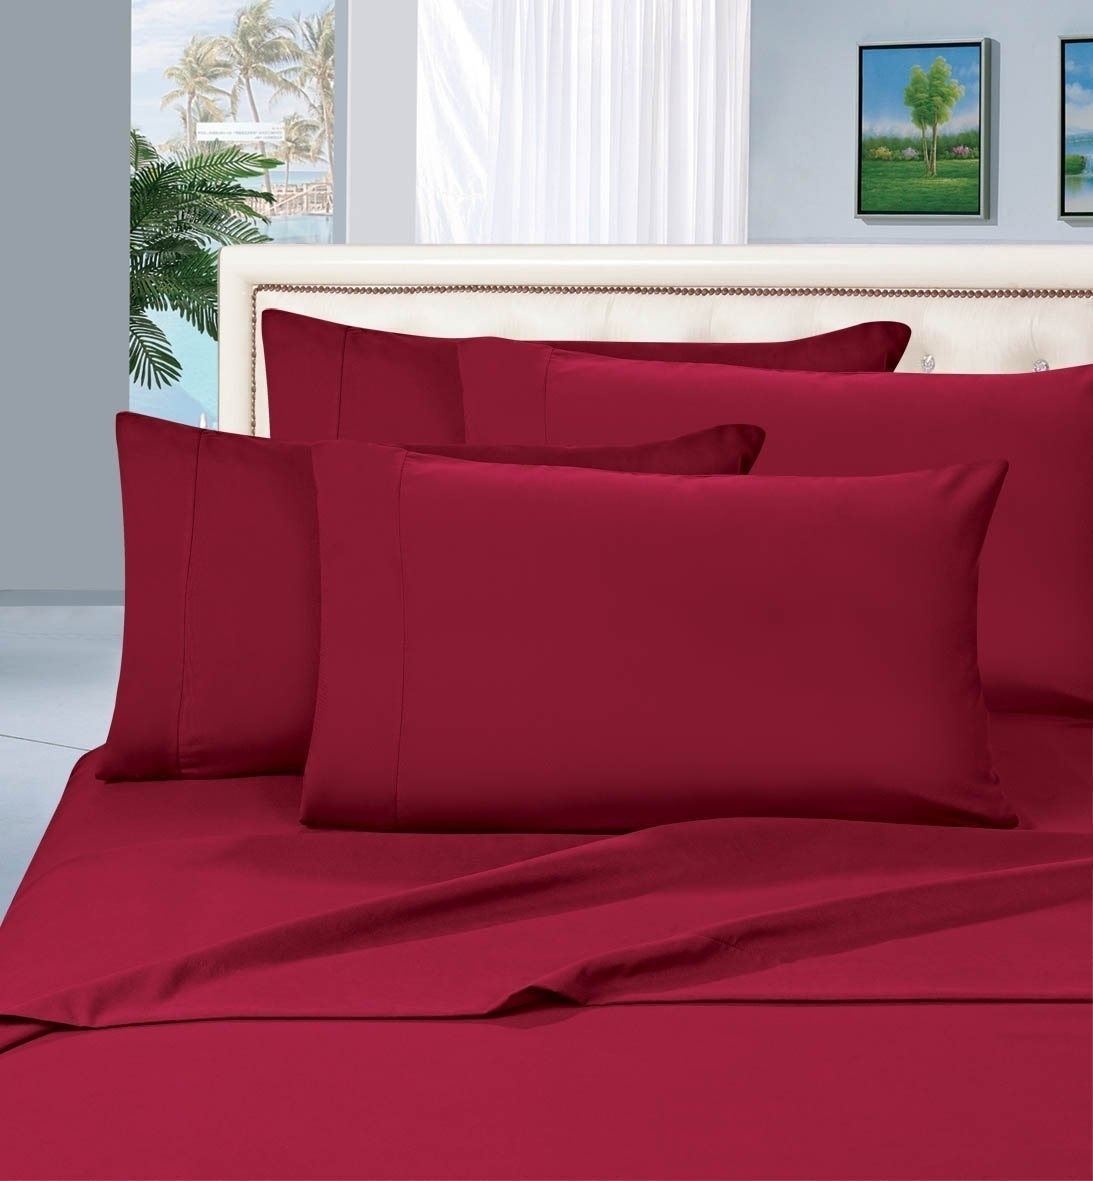 Elegant Comfort 1500 Series Wrinkle Resistant Egyptian Quality Hypoallergenic Ultra Soft Luxury 3-piece Bed Sheet Set, Twin, Burgundy